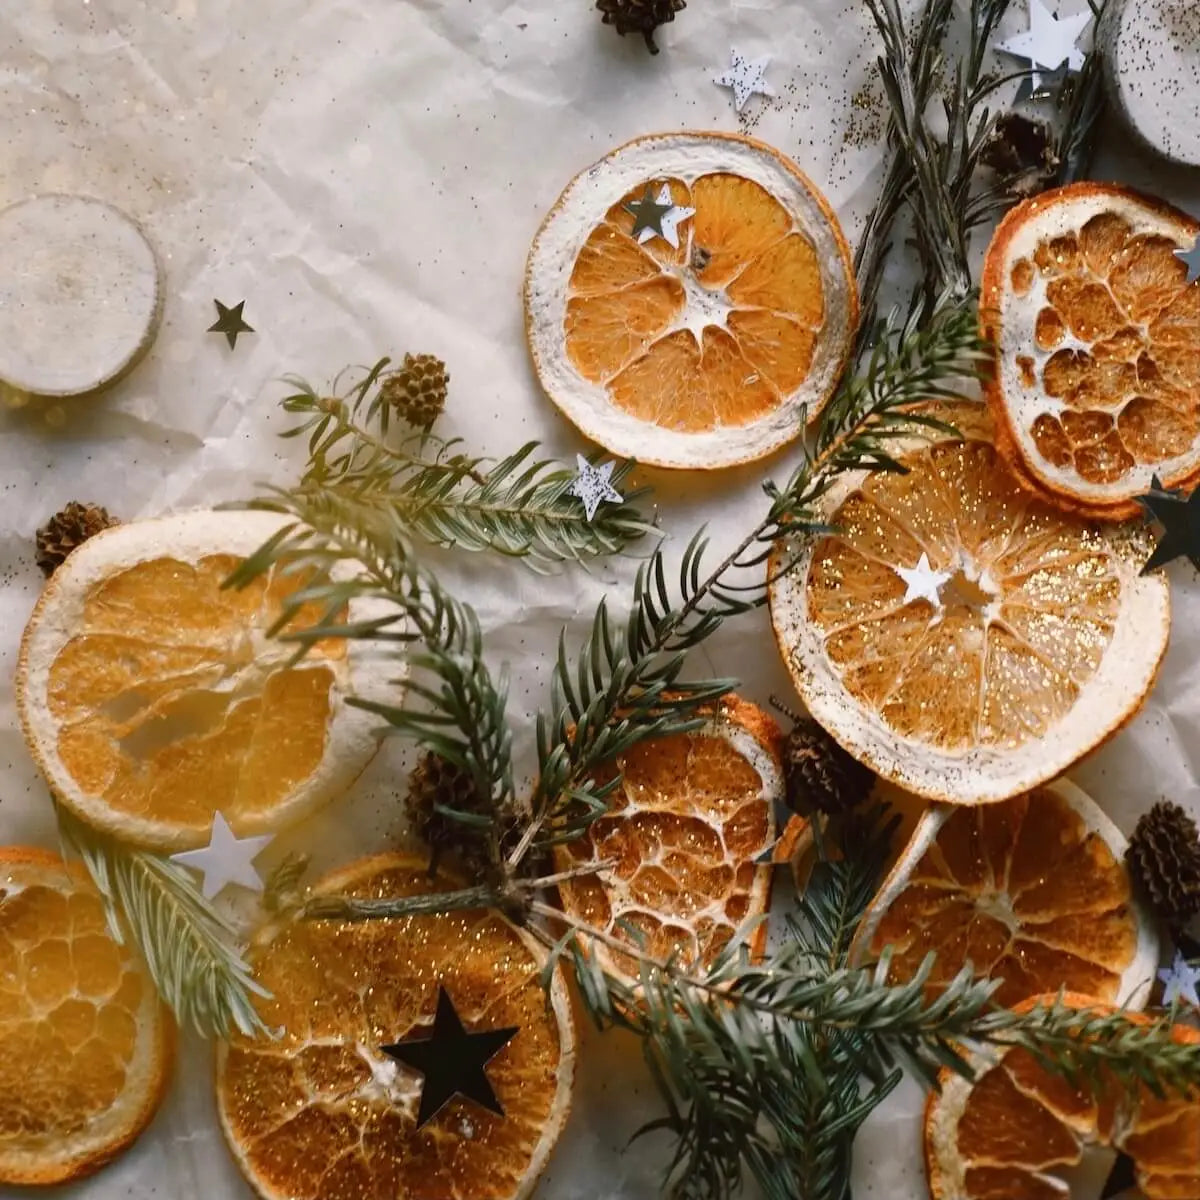 A flatlay of slices of orange, glittery stars and pine tree branches